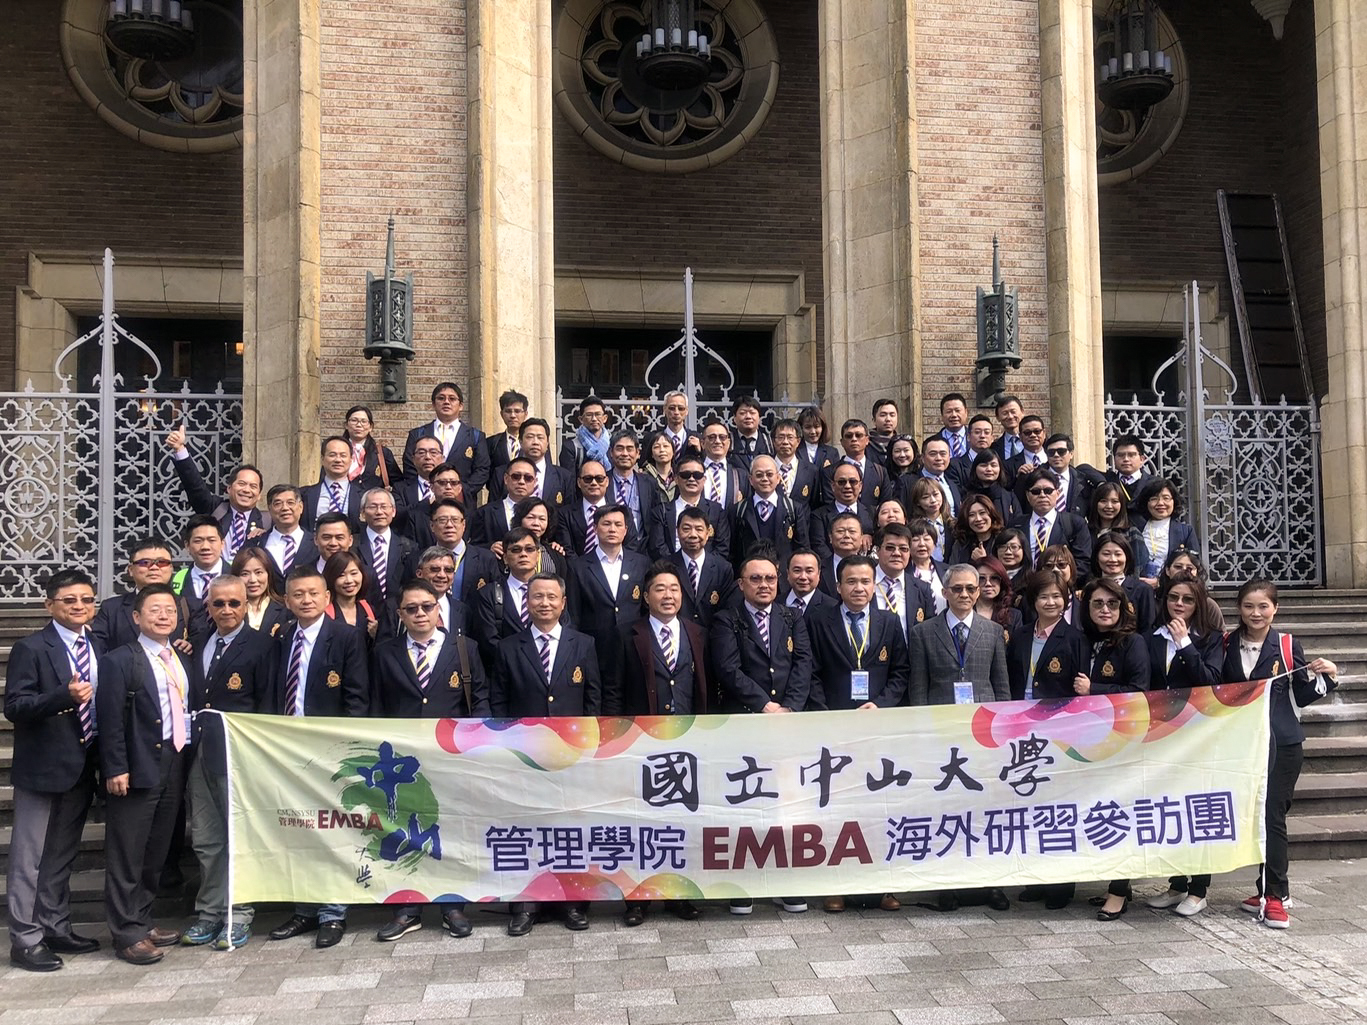 EMBA students continue to learn management practices from companies and the world’s top institutes. This picture shows the 20th class’s overseas study visit to Waseda University in Japan.